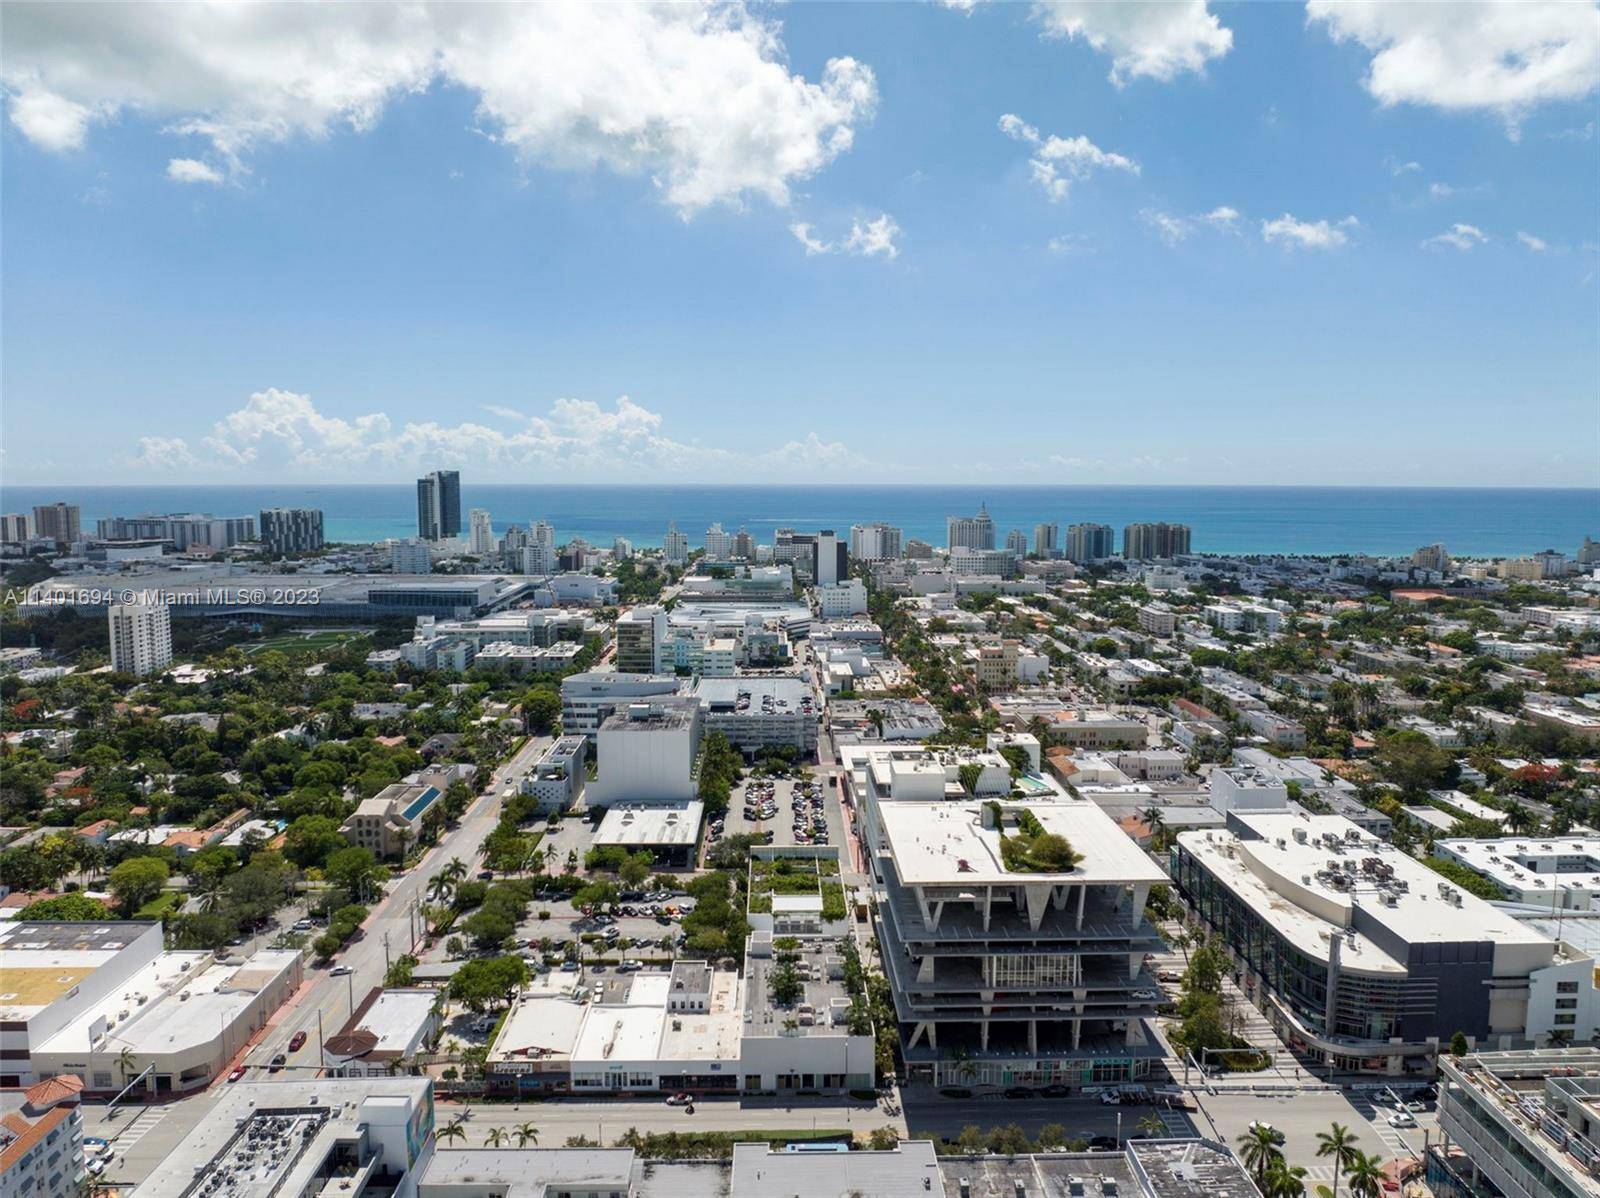 Welcome to this exquisite office space located in the heart of South Beach on Lincoln Road, Miami's premier shopping and entertainment destination.